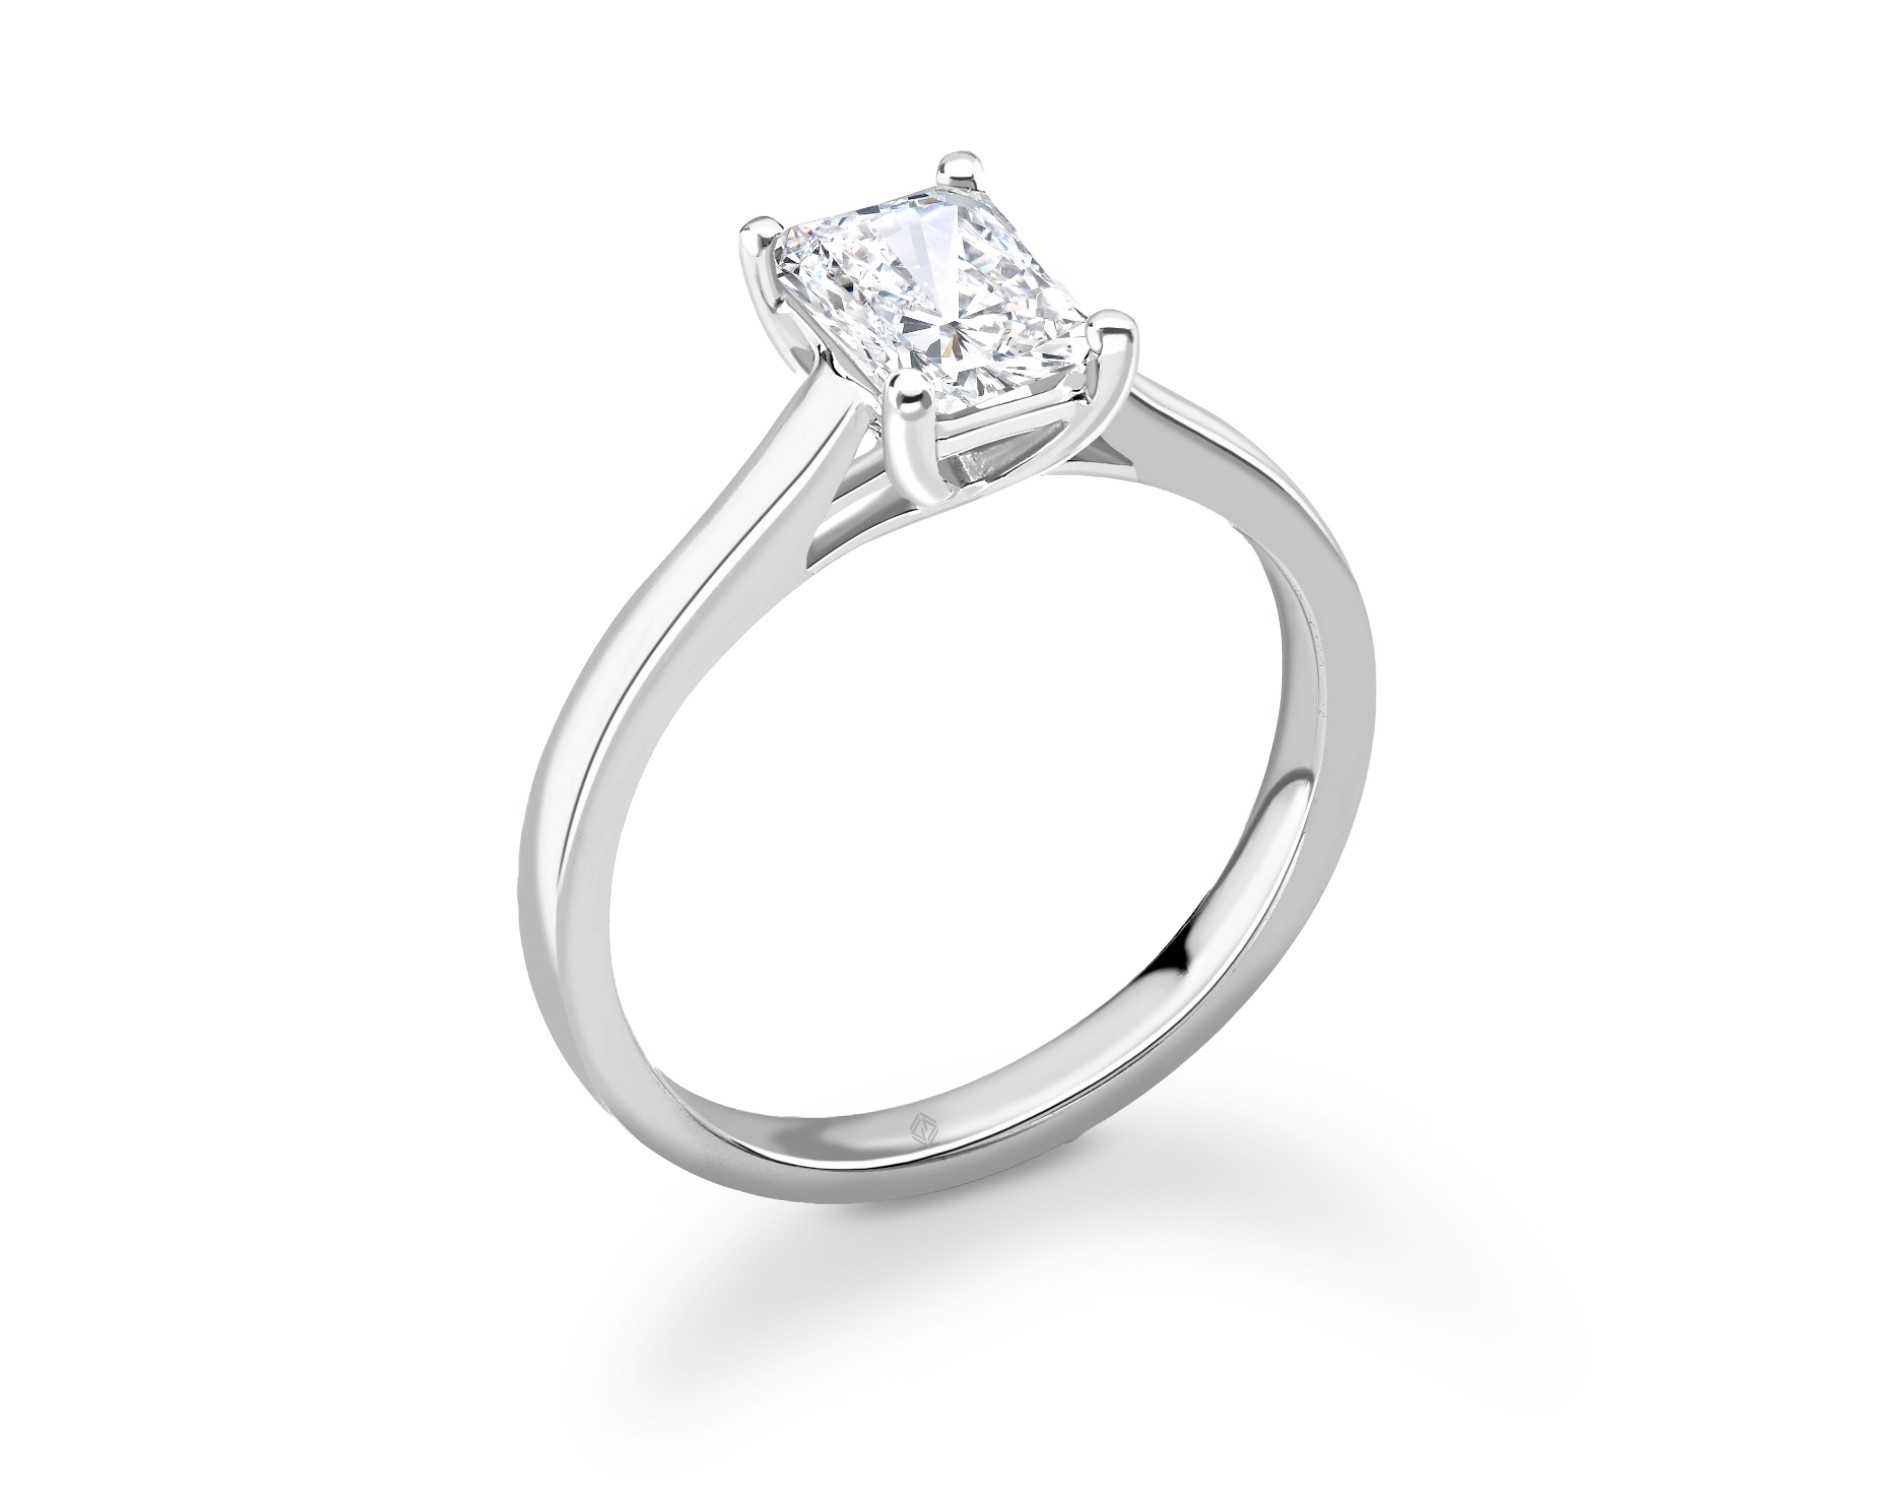 18K WHITE GOLD EMERALD CUT SOLITAIRE DIAMOND ENGAGEMENT RING